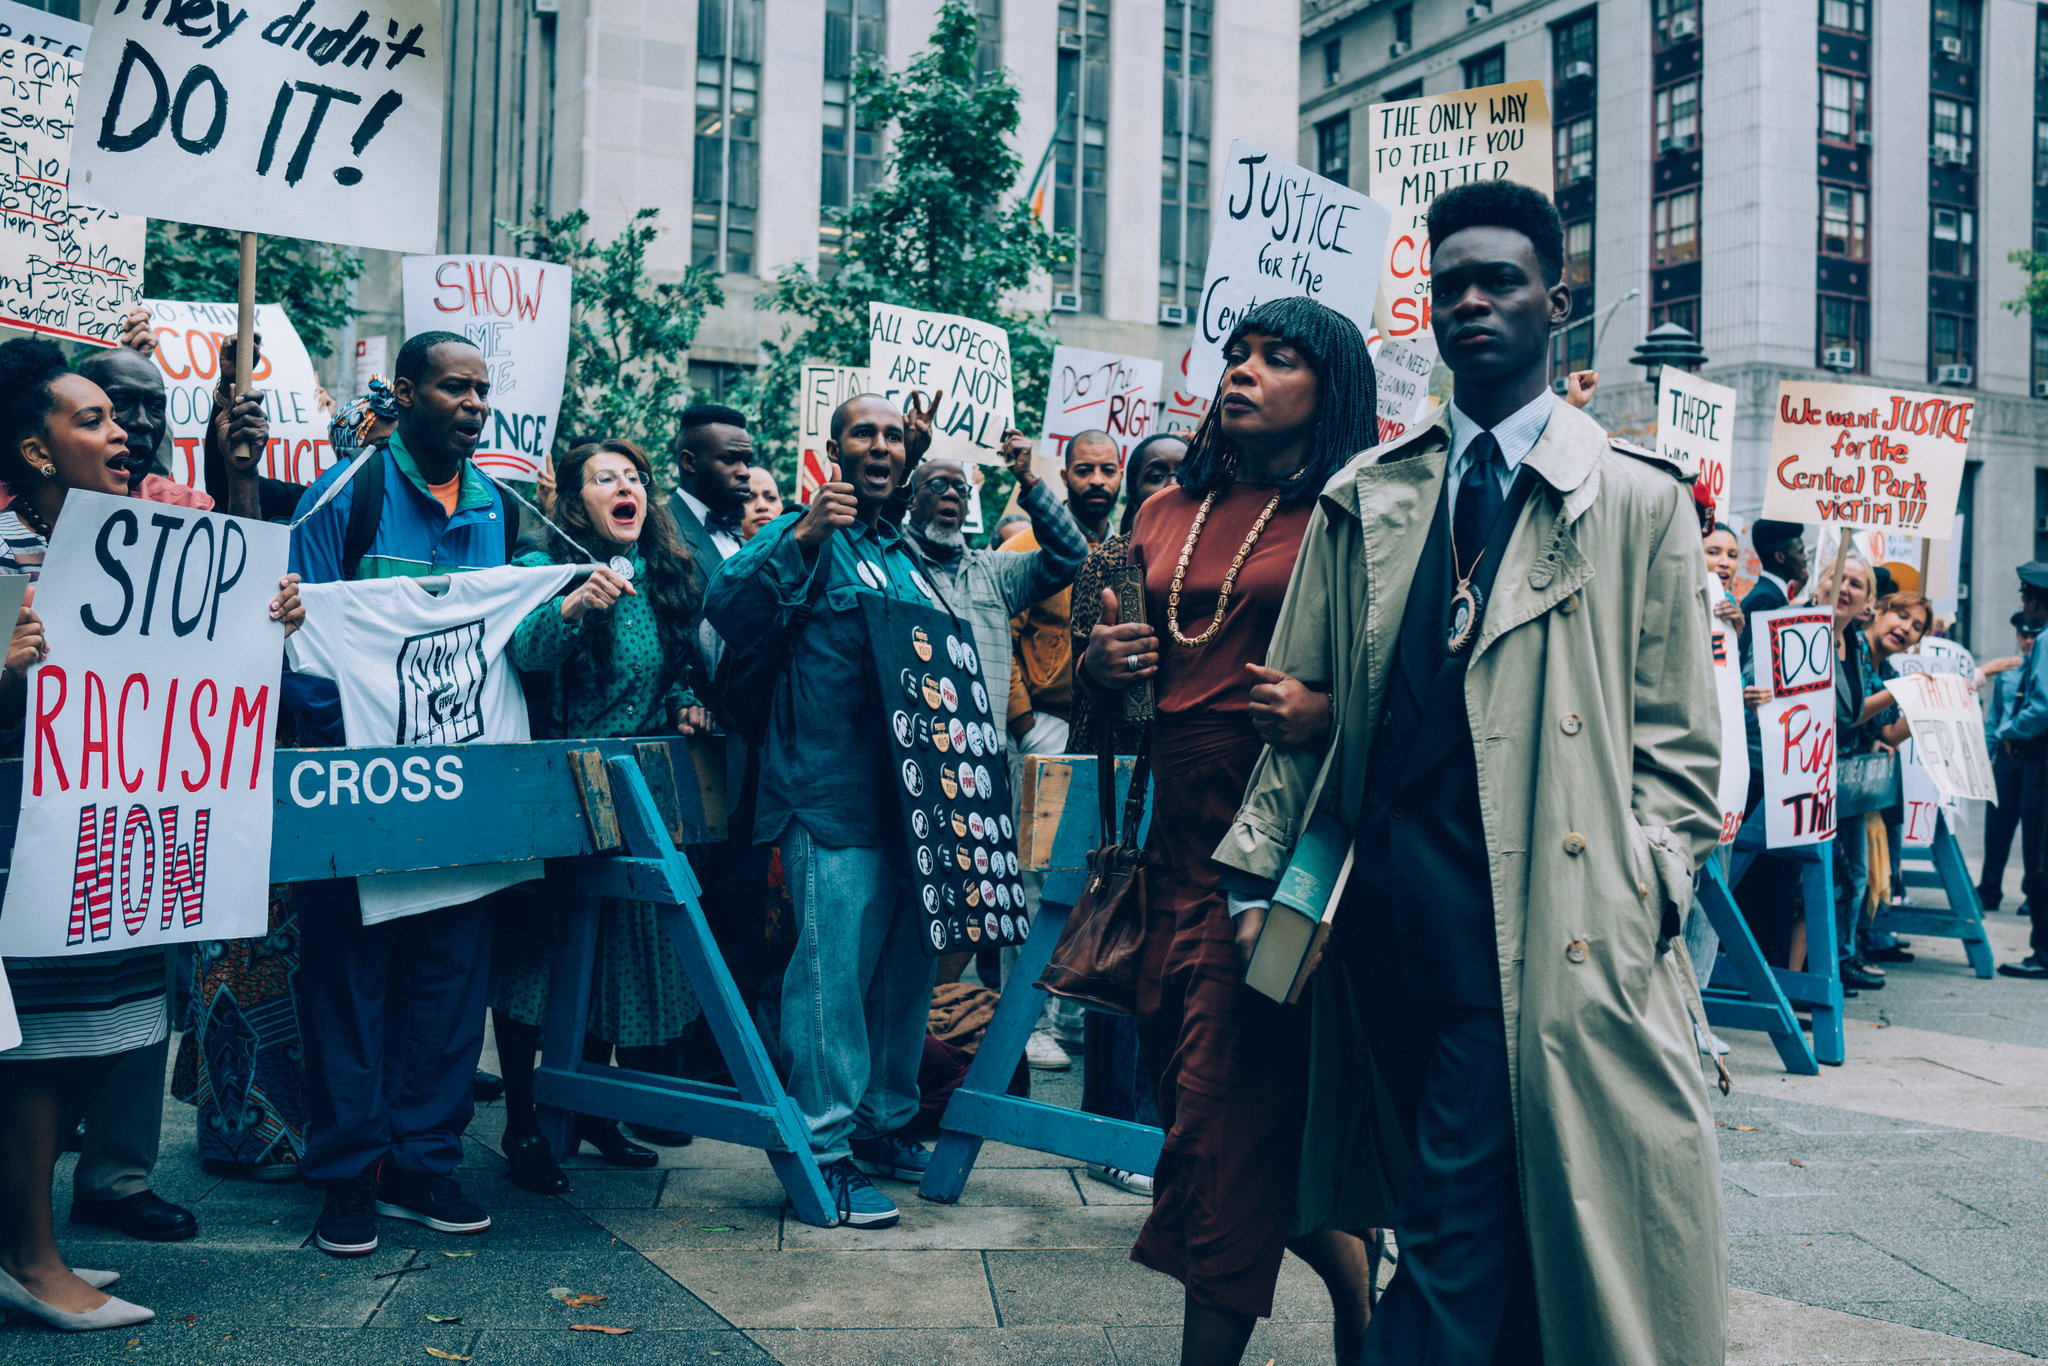 6. 'When They See Us'